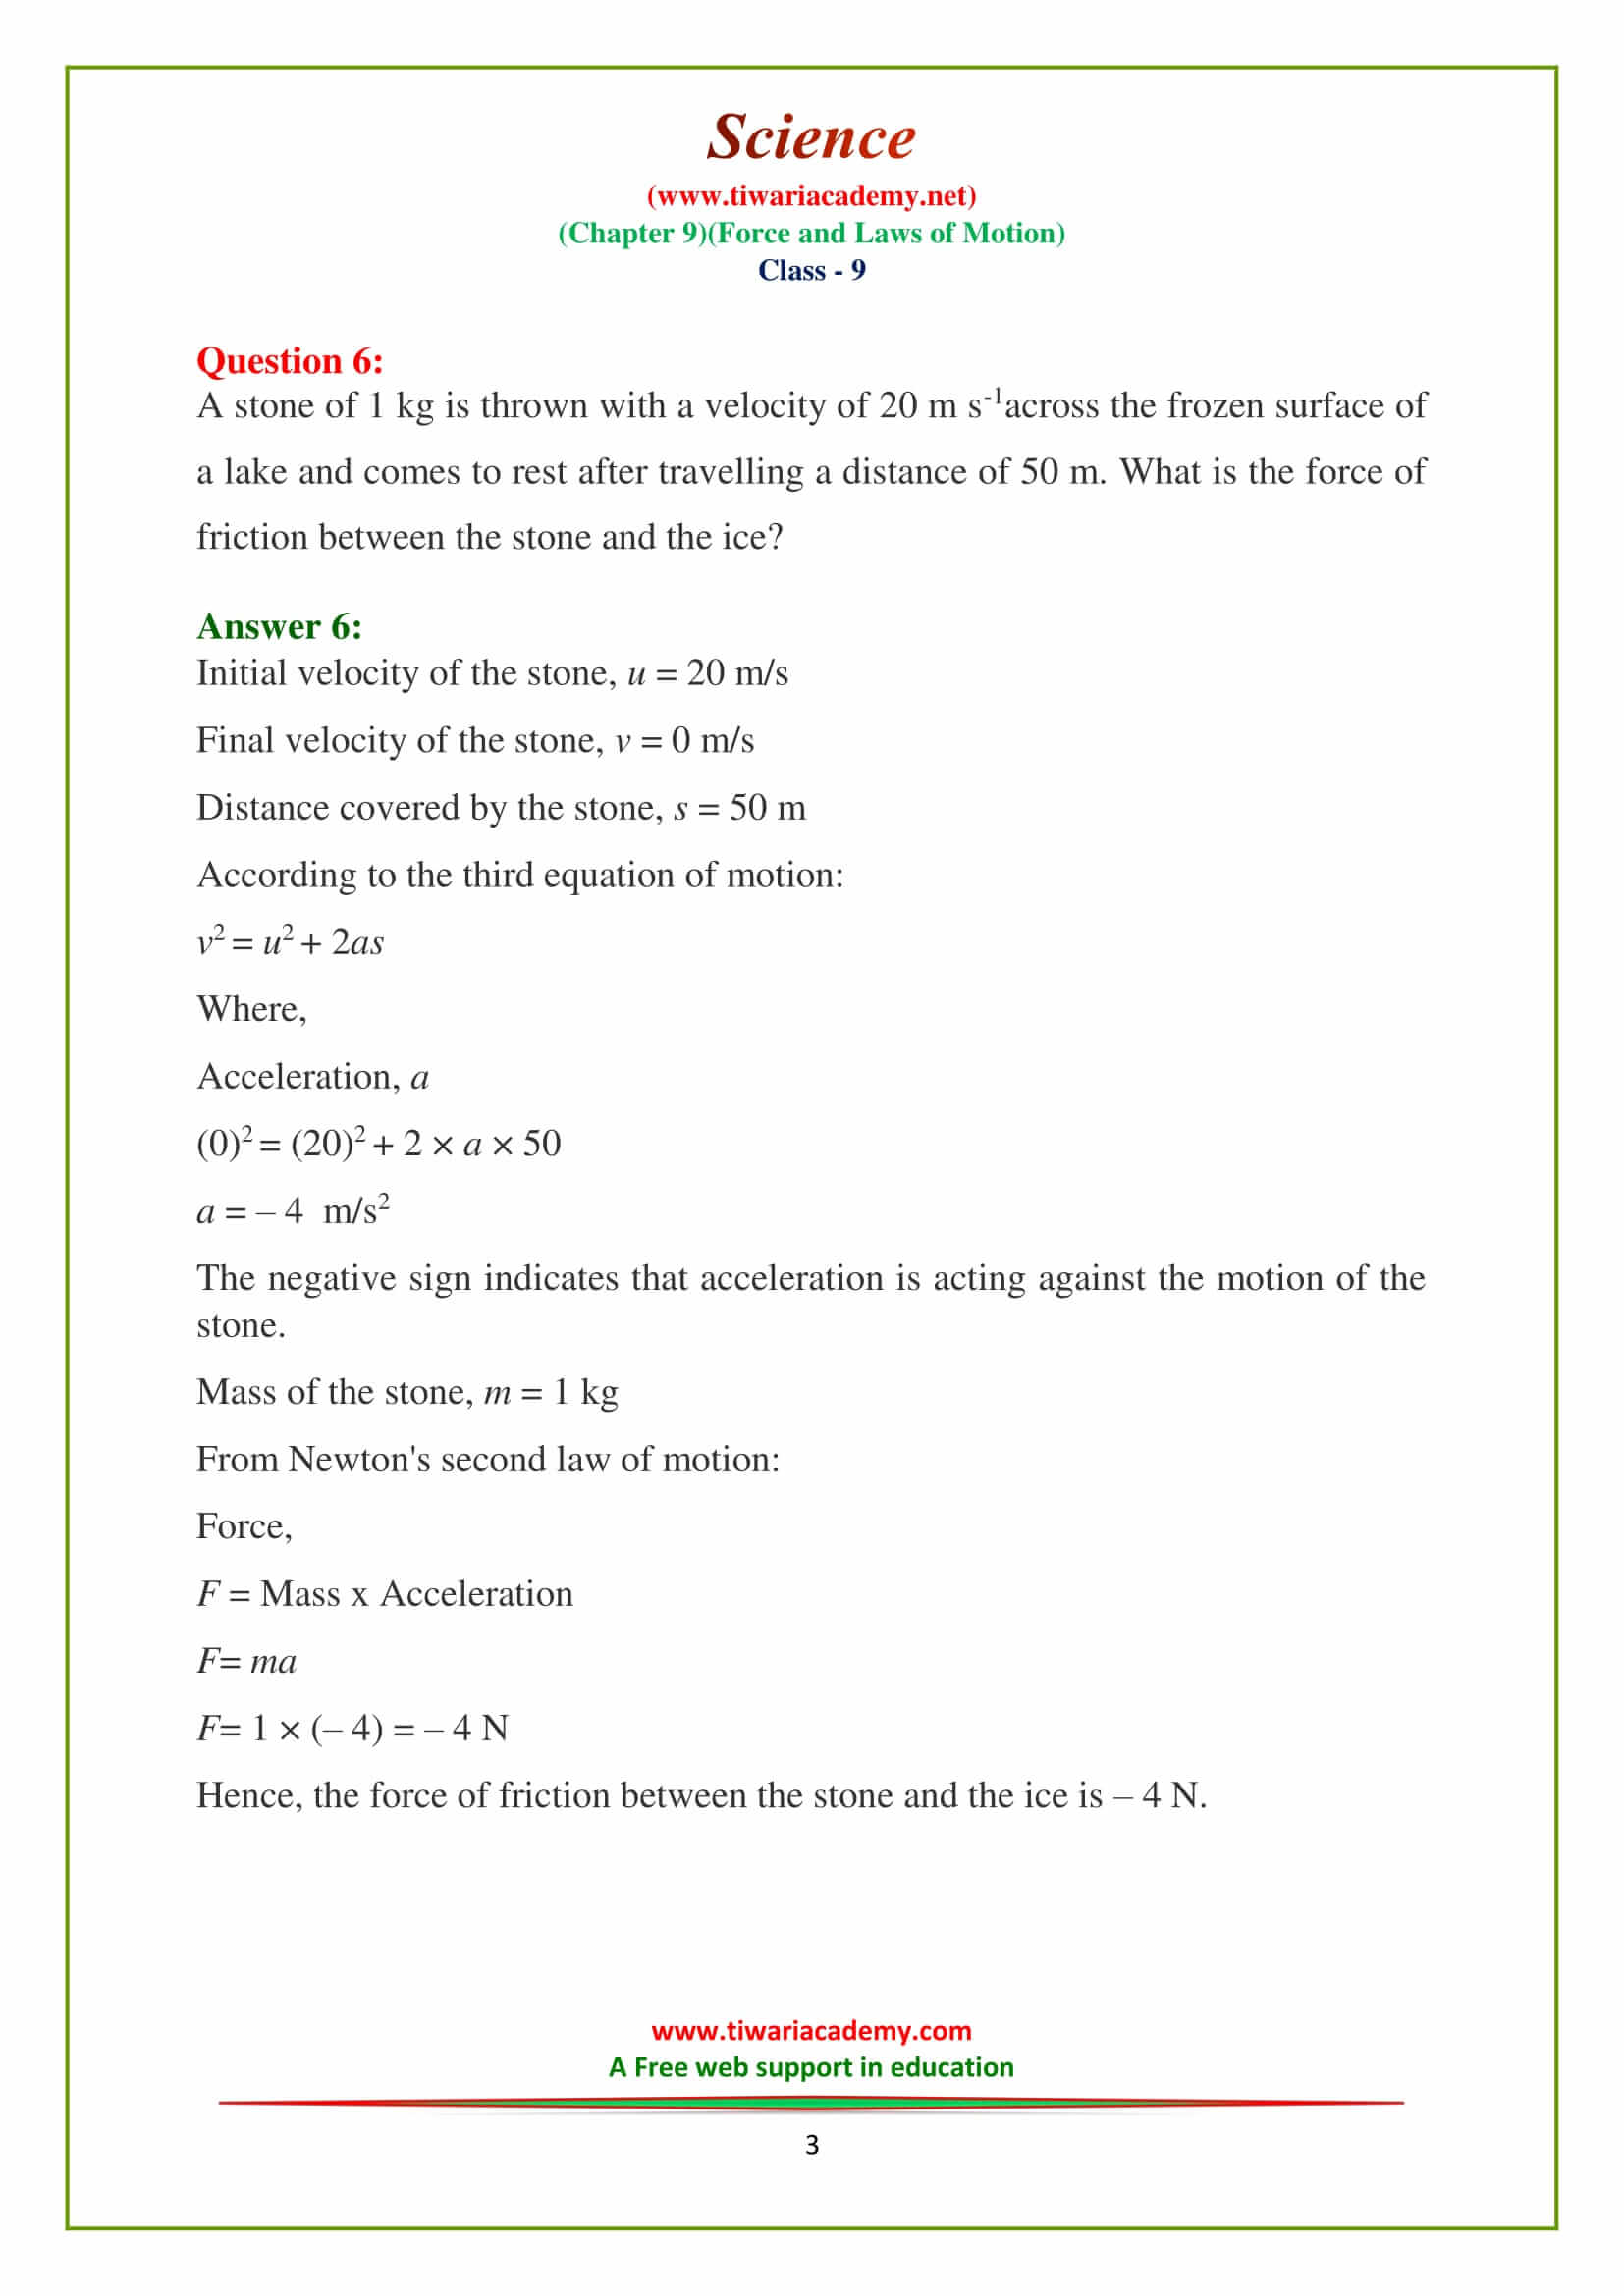 9 Science Chapter 9 force and laws of motion Exercises questions for up board high school